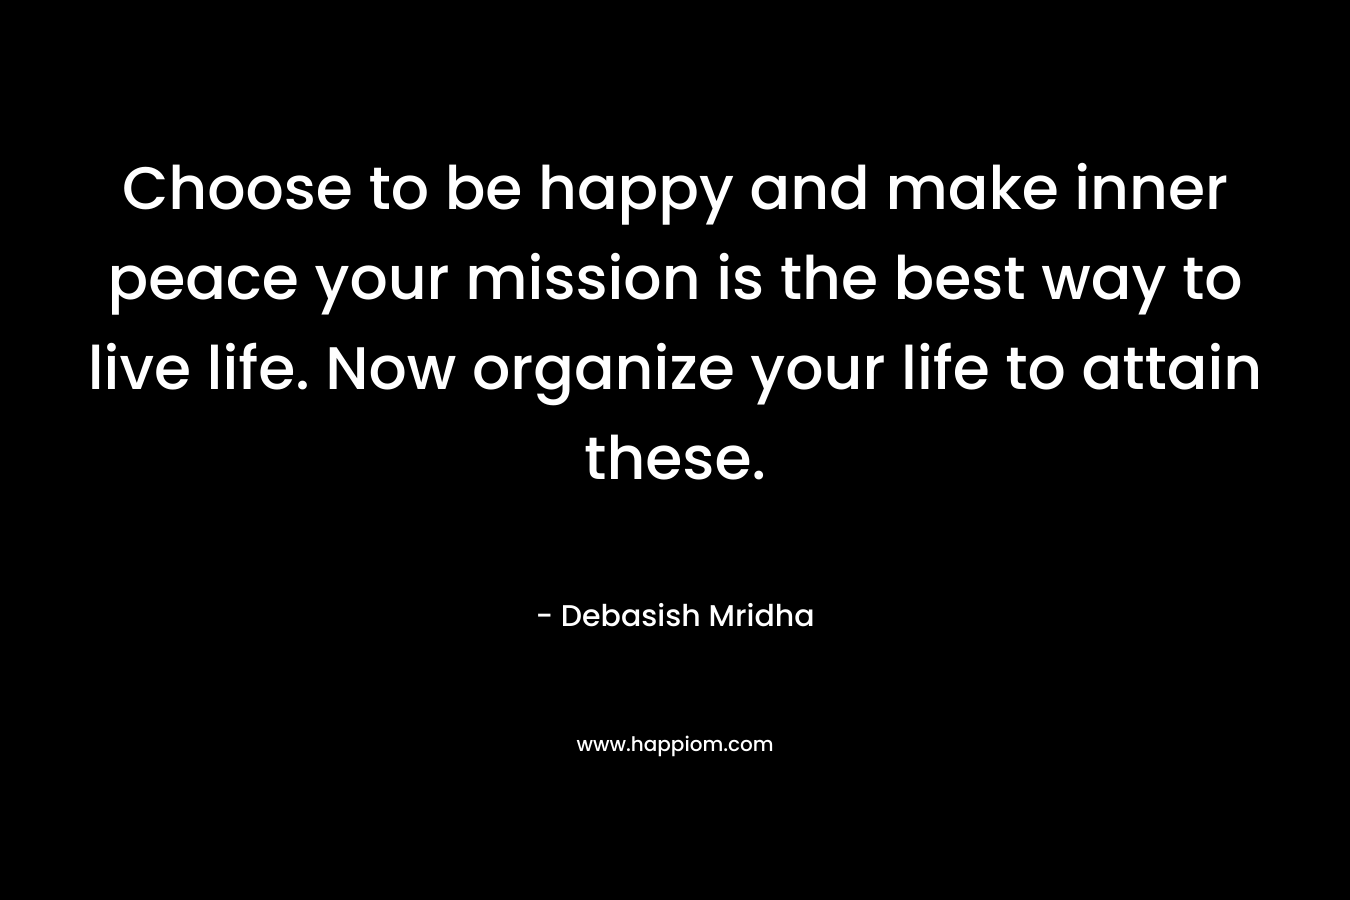 Choose to be happy and make inner peace your mission is the best way to live life. Now organize your life to attain these.